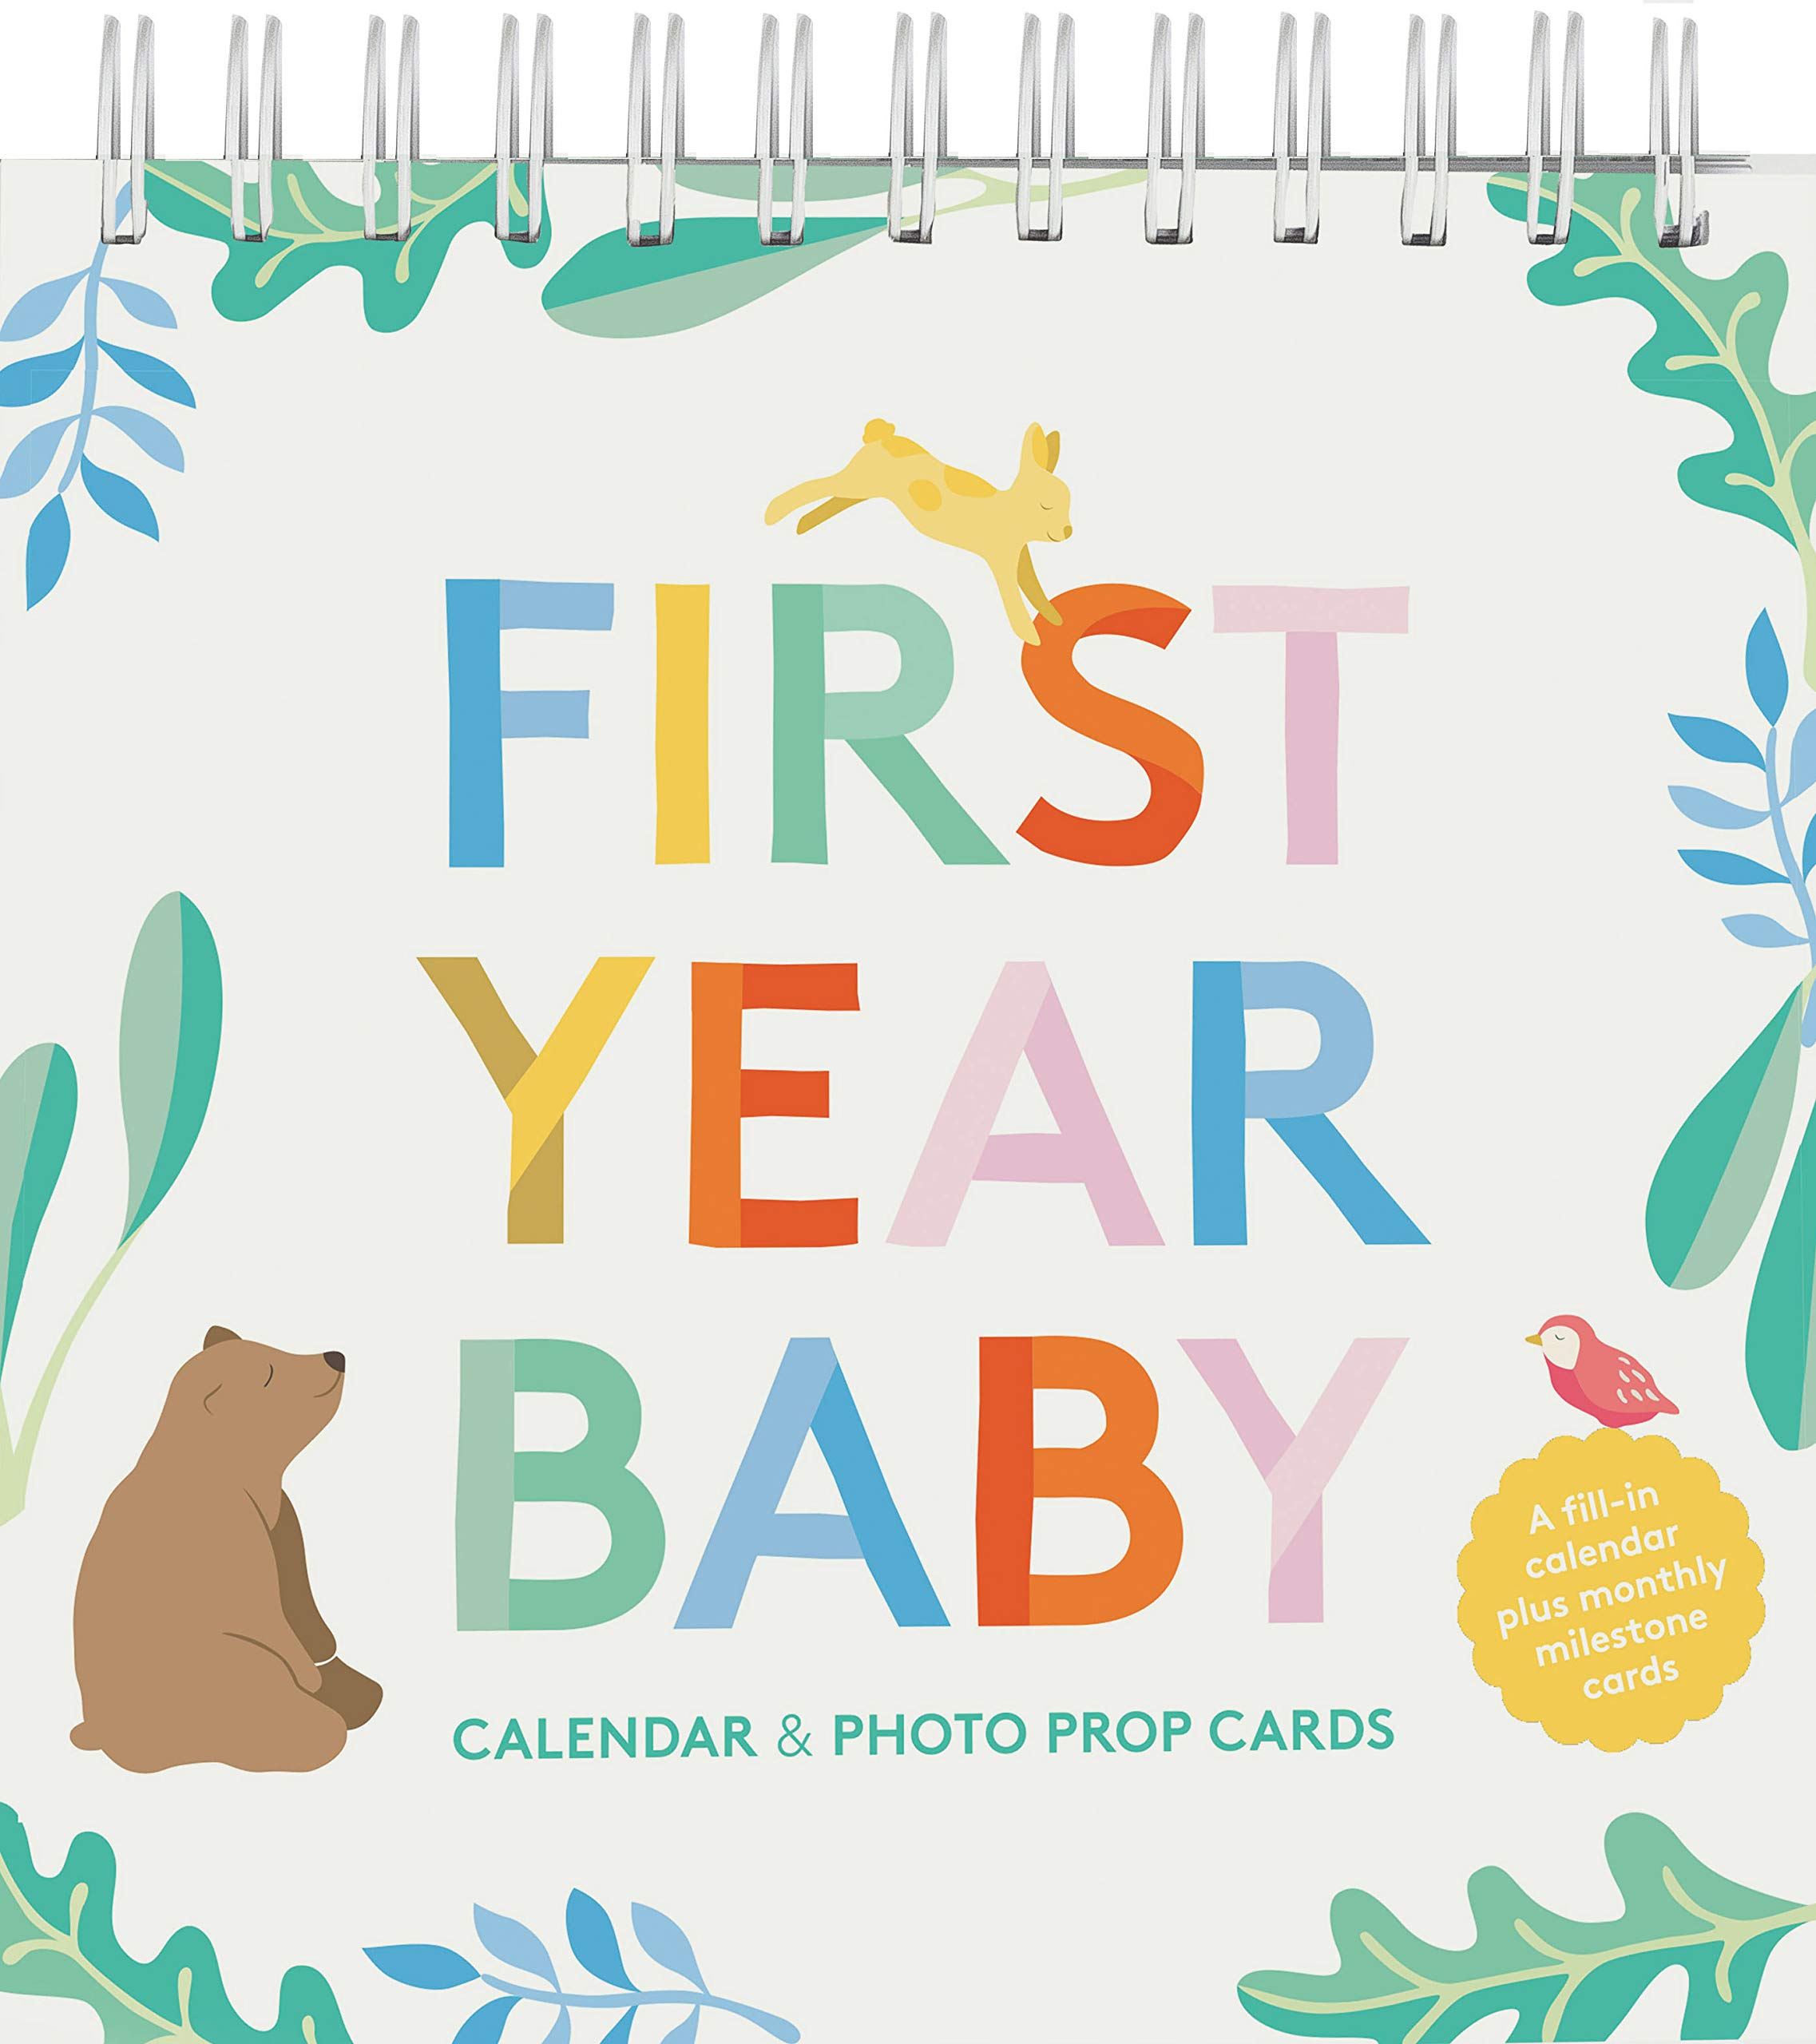 First Year Baby Calendar & Photo Prop Cards | Chronicle Books